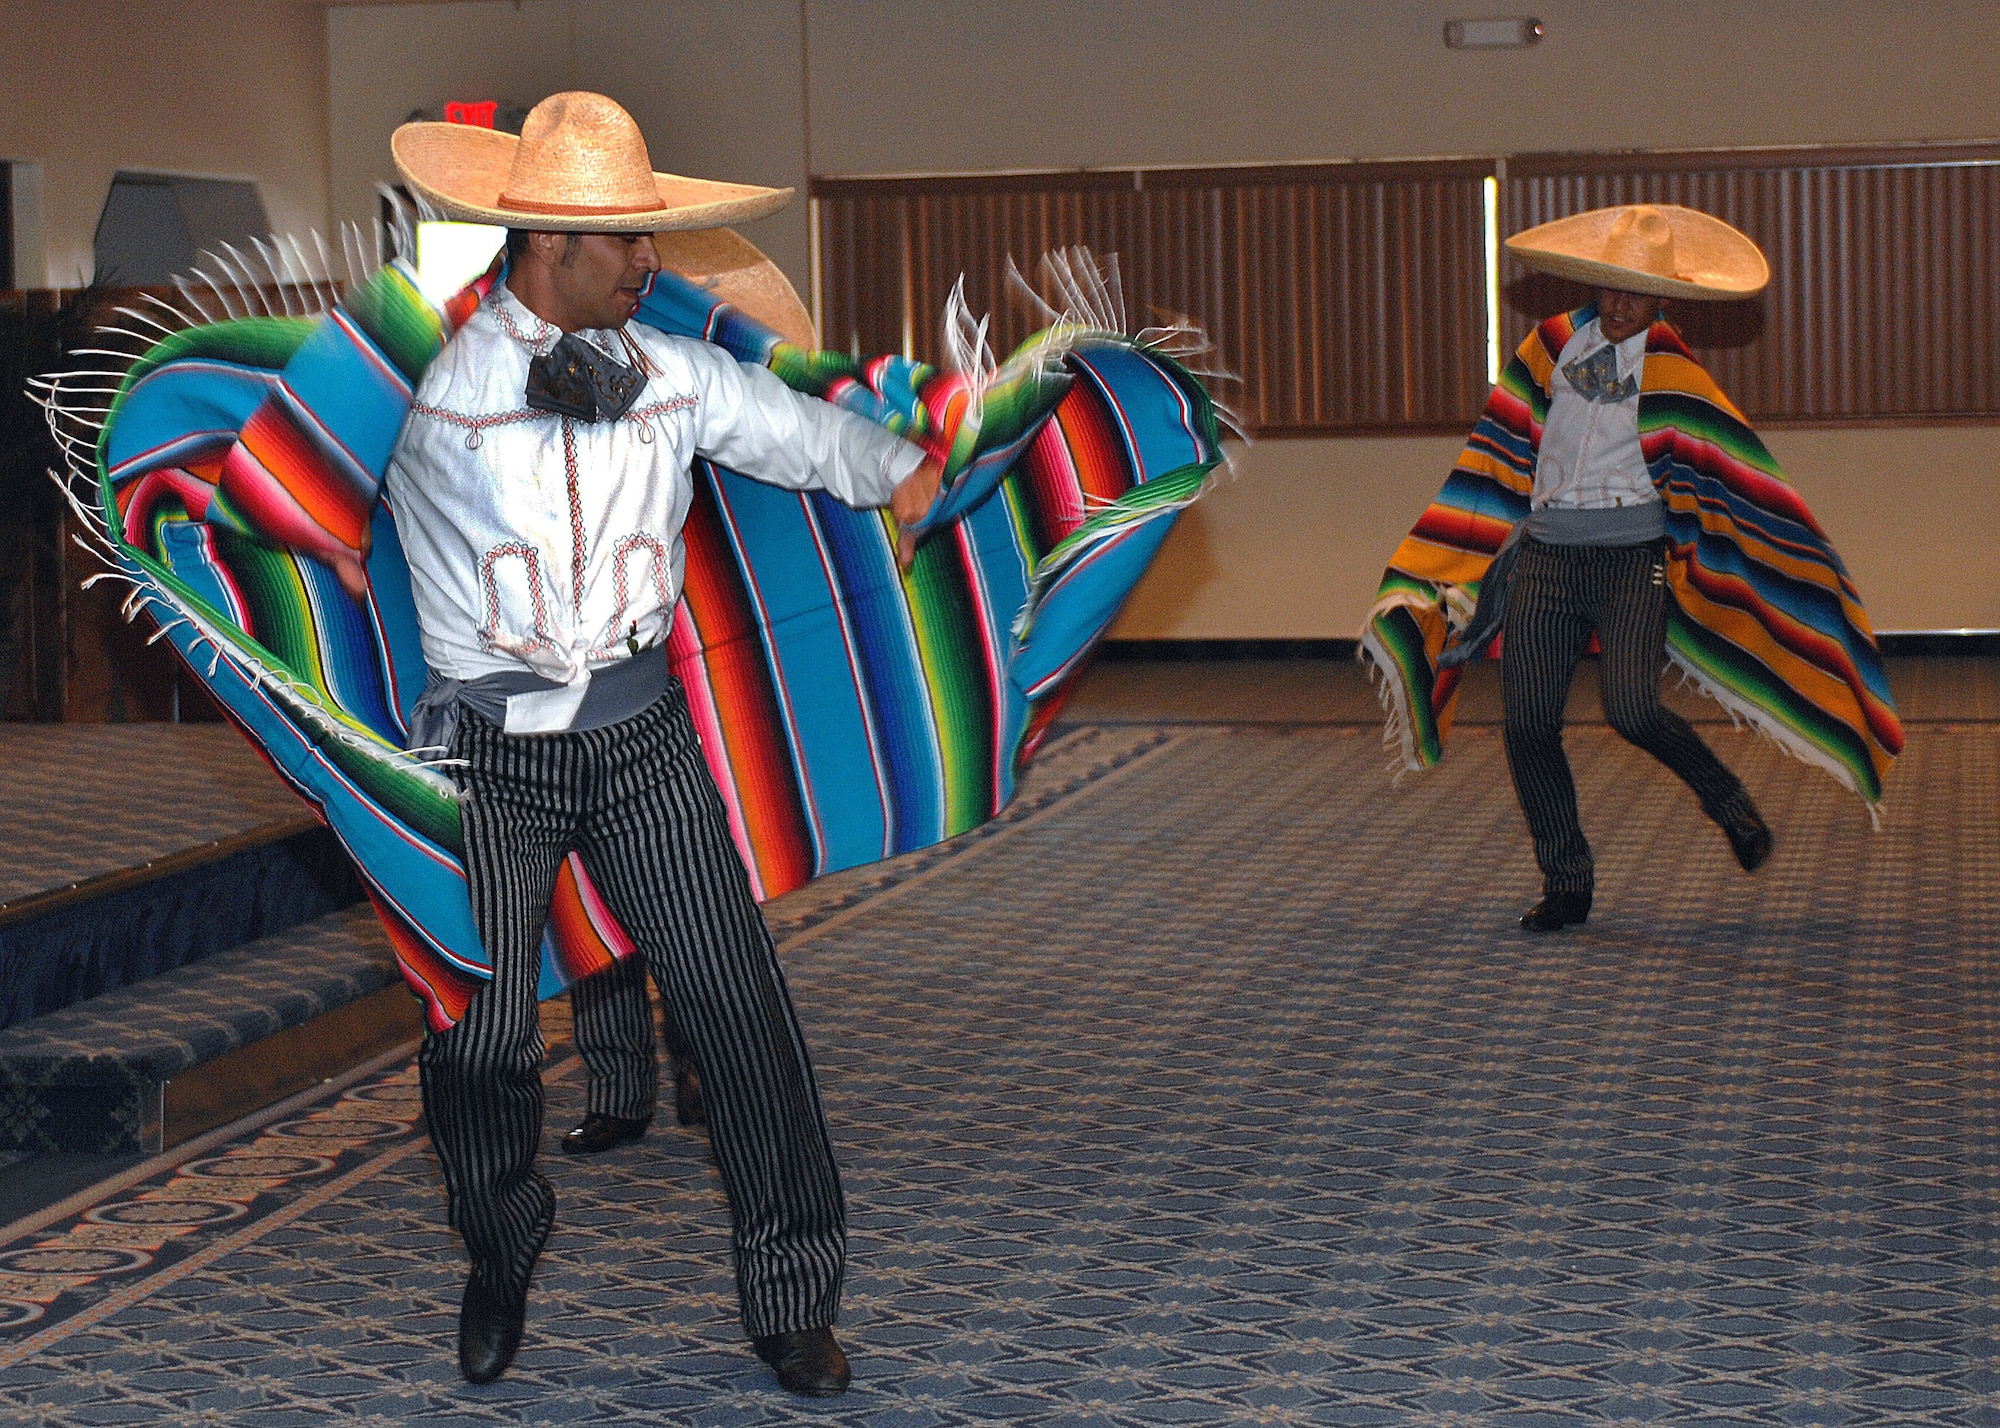 Ballet Folklorico Quetzales dancers step to the beat of Mexican music for the Hispanic Heritage Luncheon, at Holloman Air Force Base, N.M., September 25. Dressed in sombreros and covered with their Serape Mexican blankets, the dancers entertained their guests with their heel-stomping routine. (U.S. Air Force photo/Airman 1st. Class Veronica Salgado)